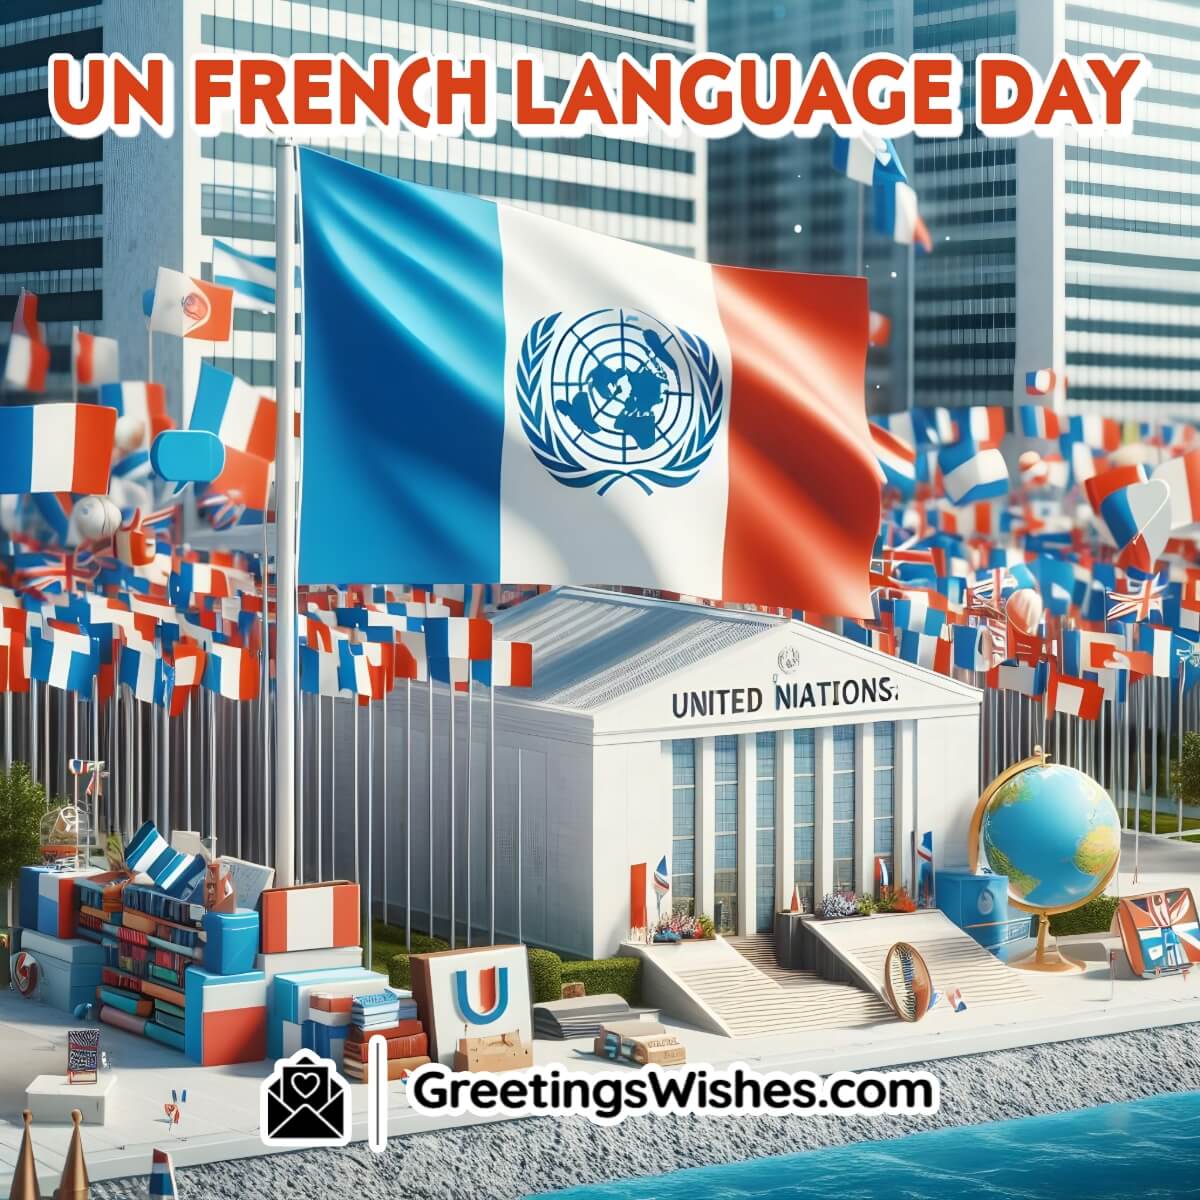 History Of Un French Language Day